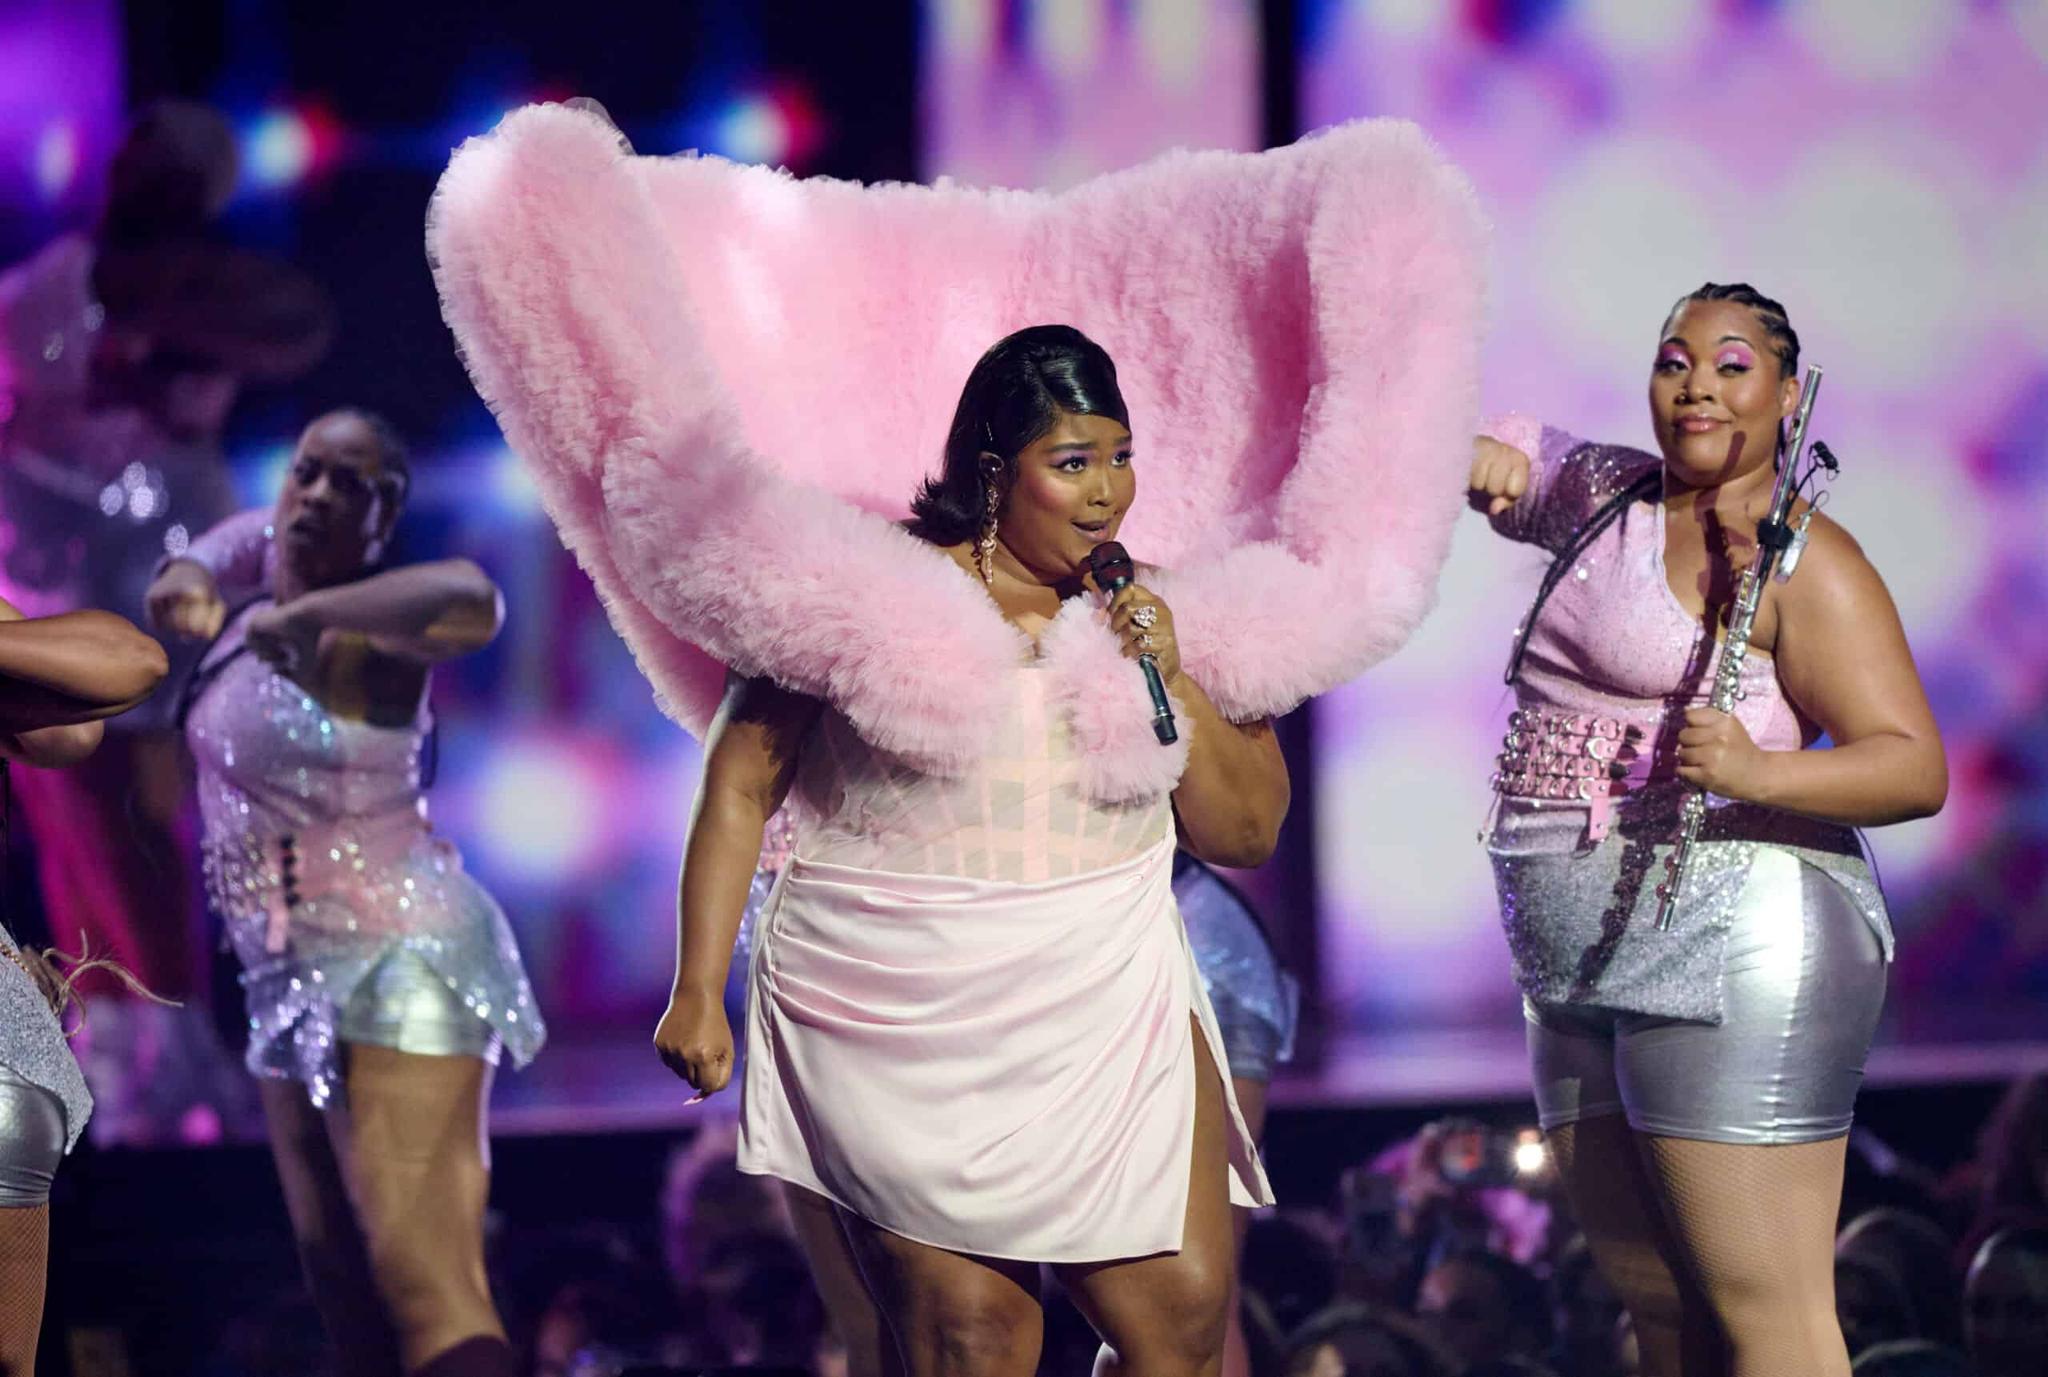 Lizzo's Lawyer Says She Plans To Countersue Former Backup Dancers